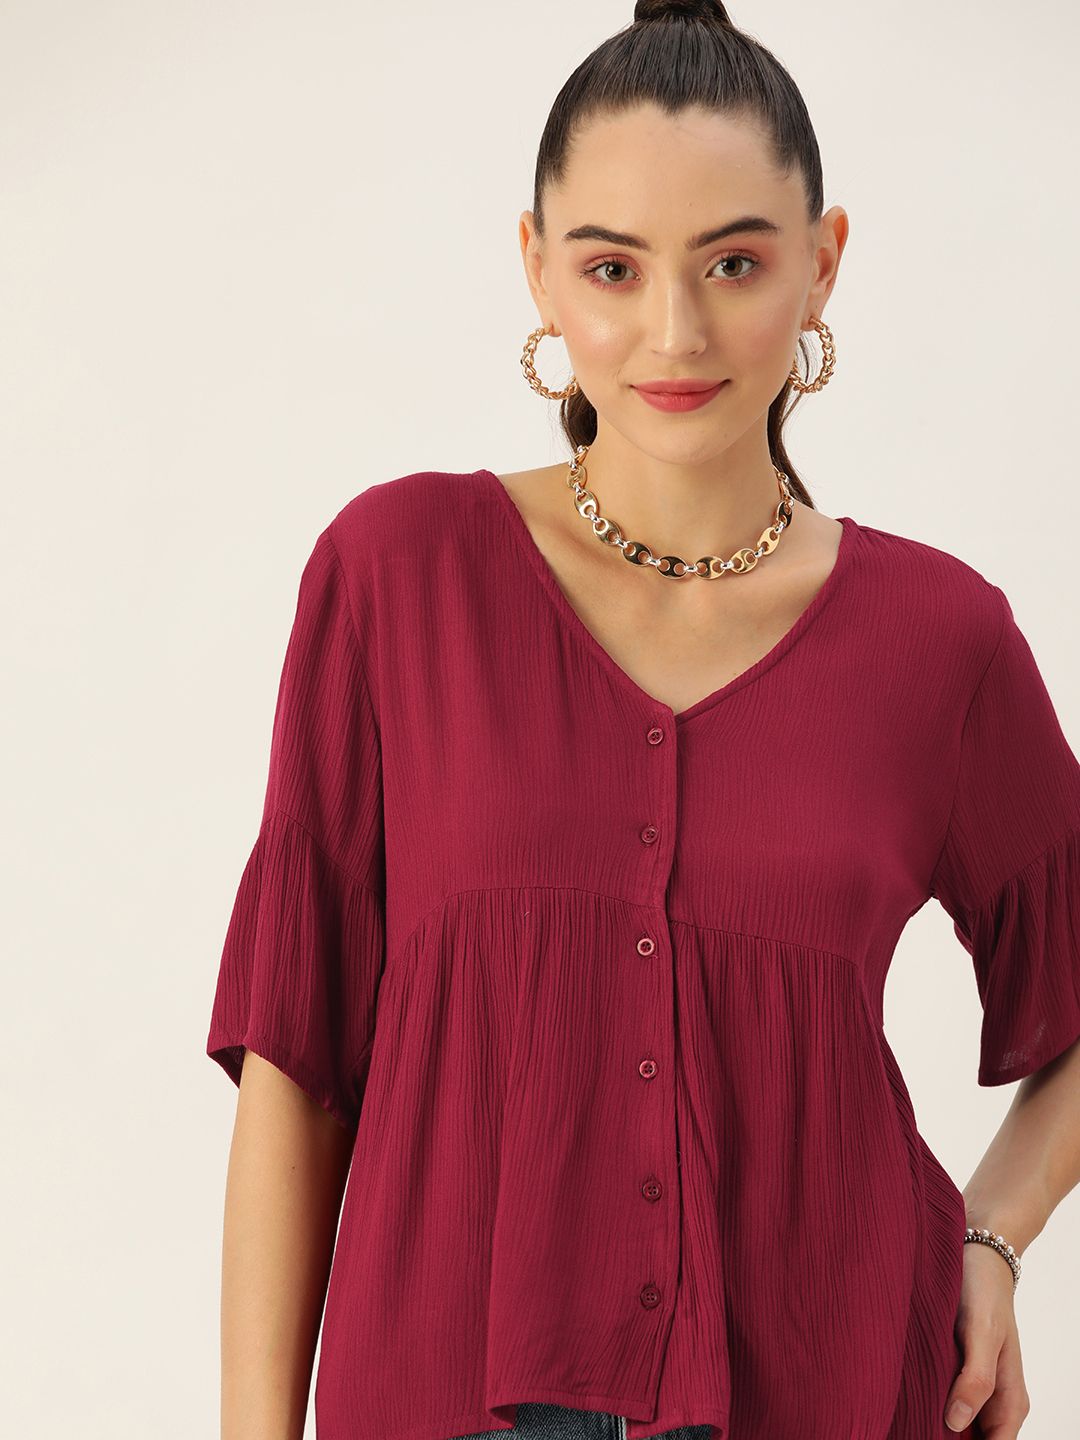 DressBerry Maroon Solid V-Neck Peplum Top Price in India